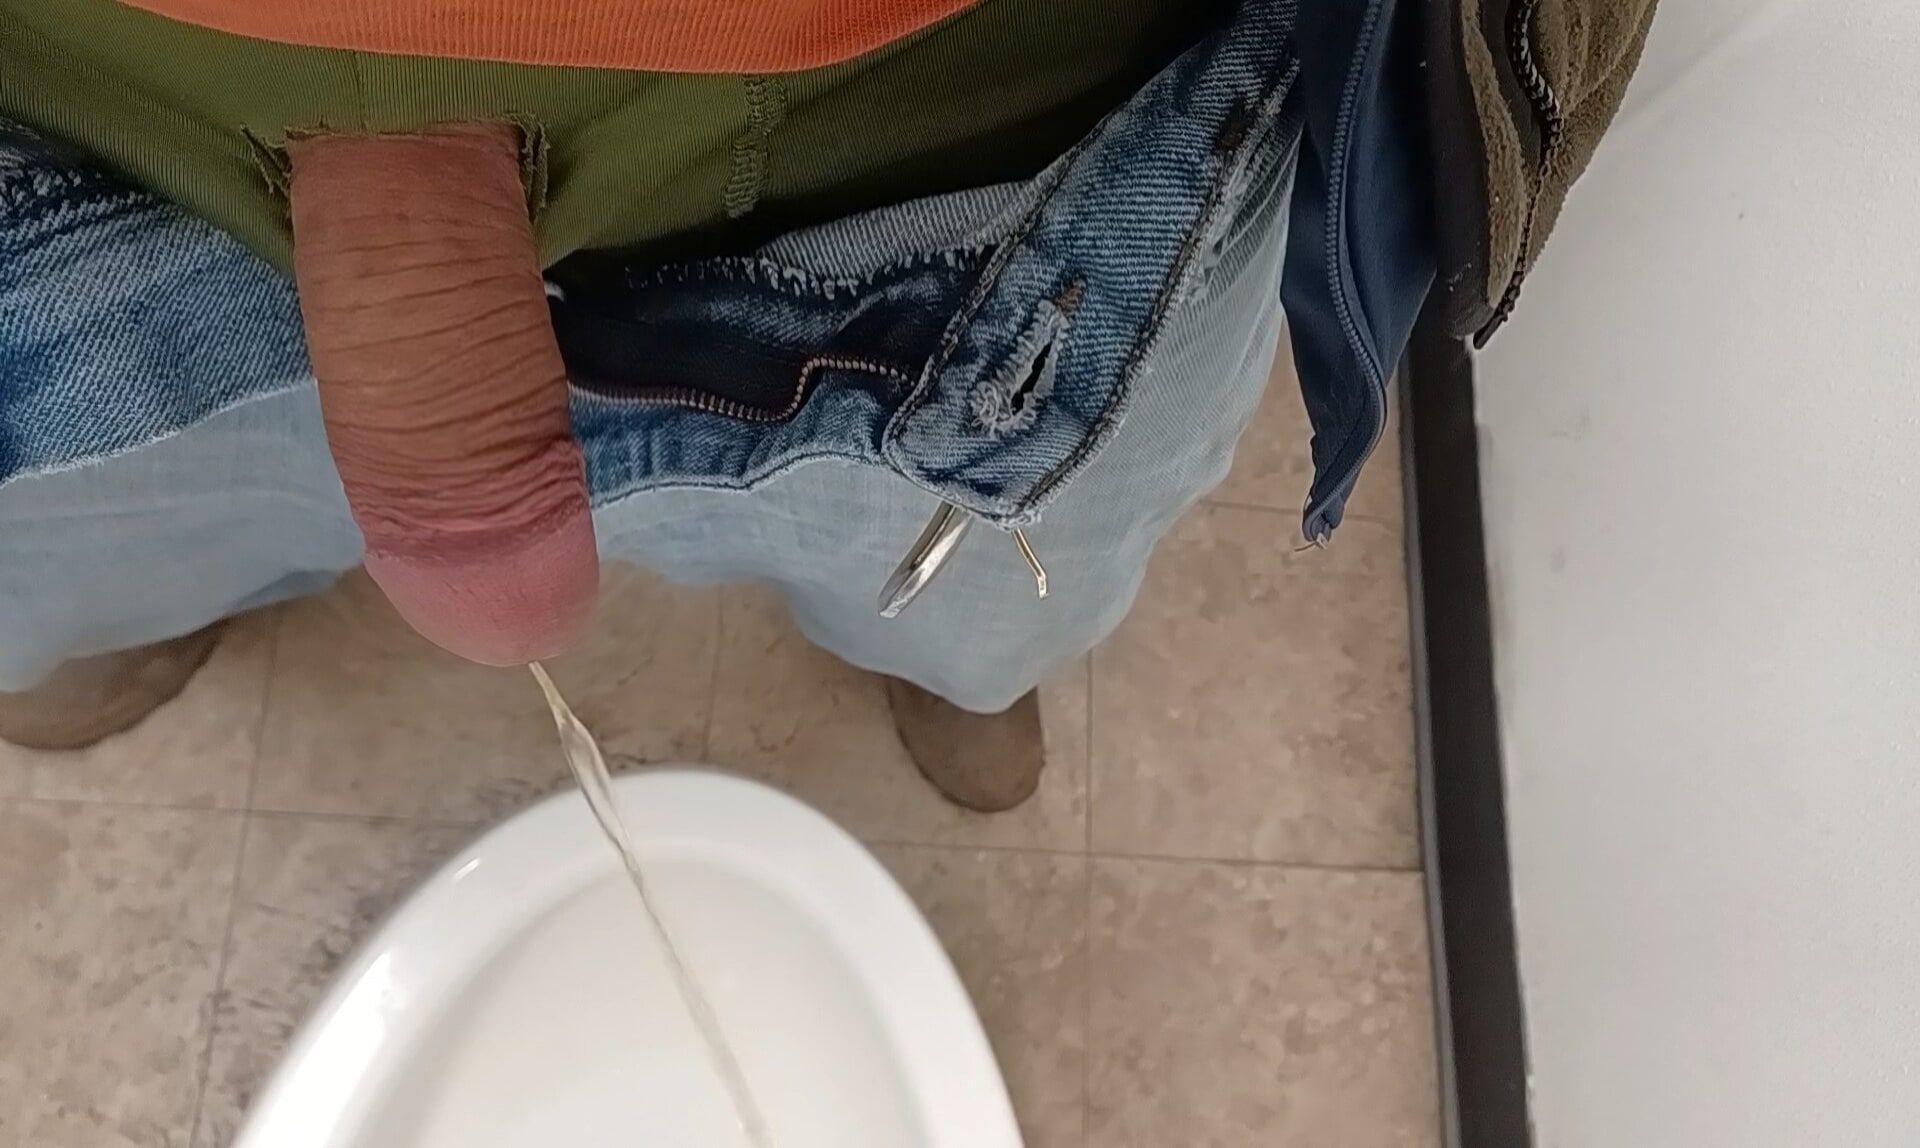 My pissing cock